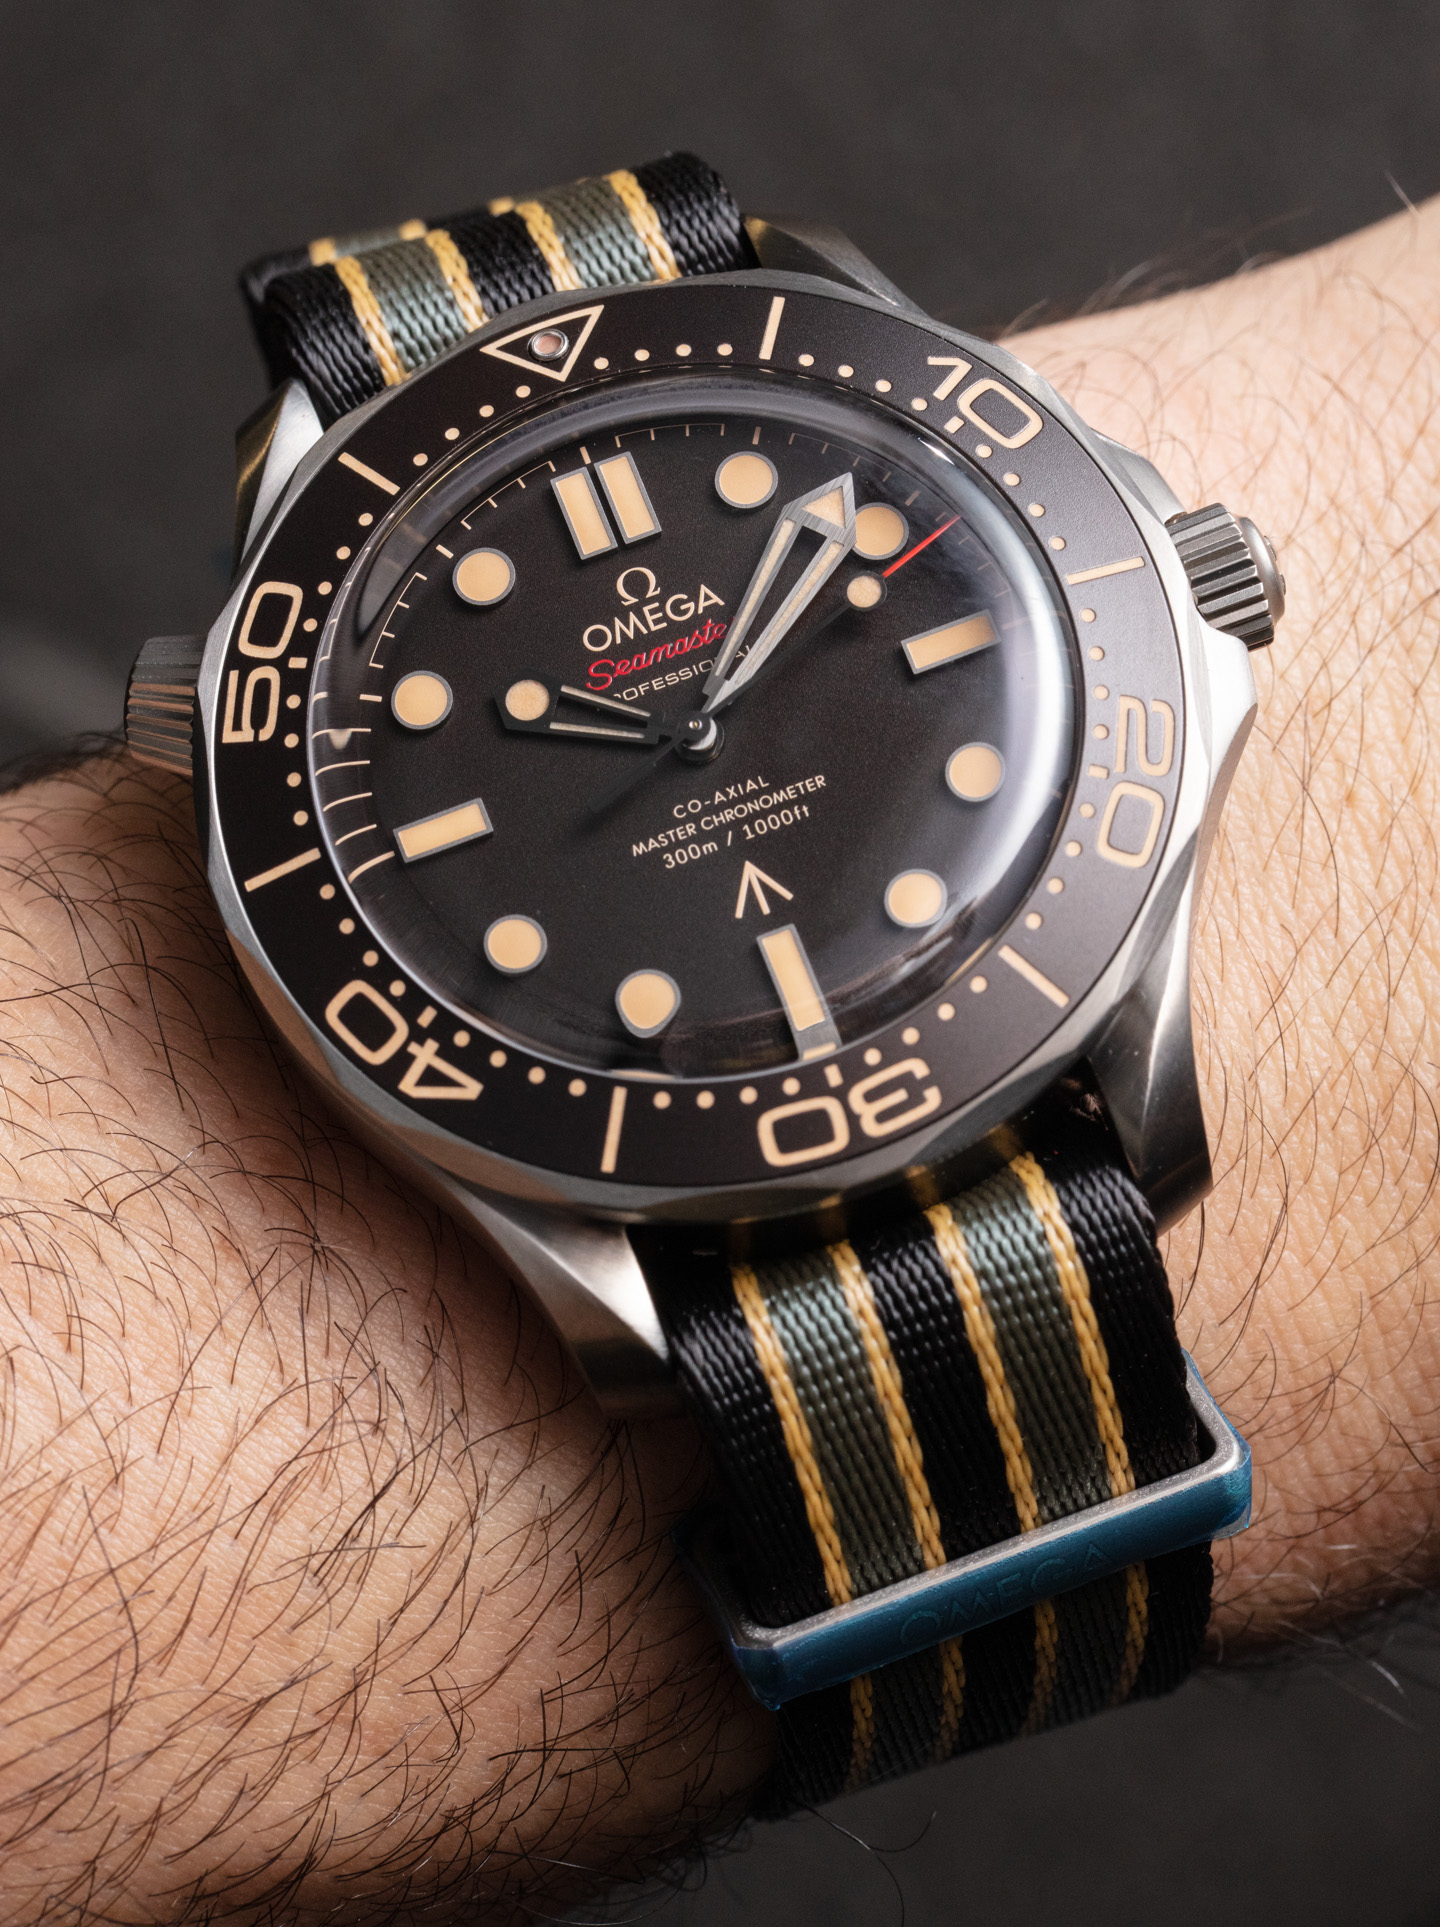 Hands-On: Omega Seamaster 300M 007 'No Time To Die' Watch For Daniel Craig  | aBlogtoWatch